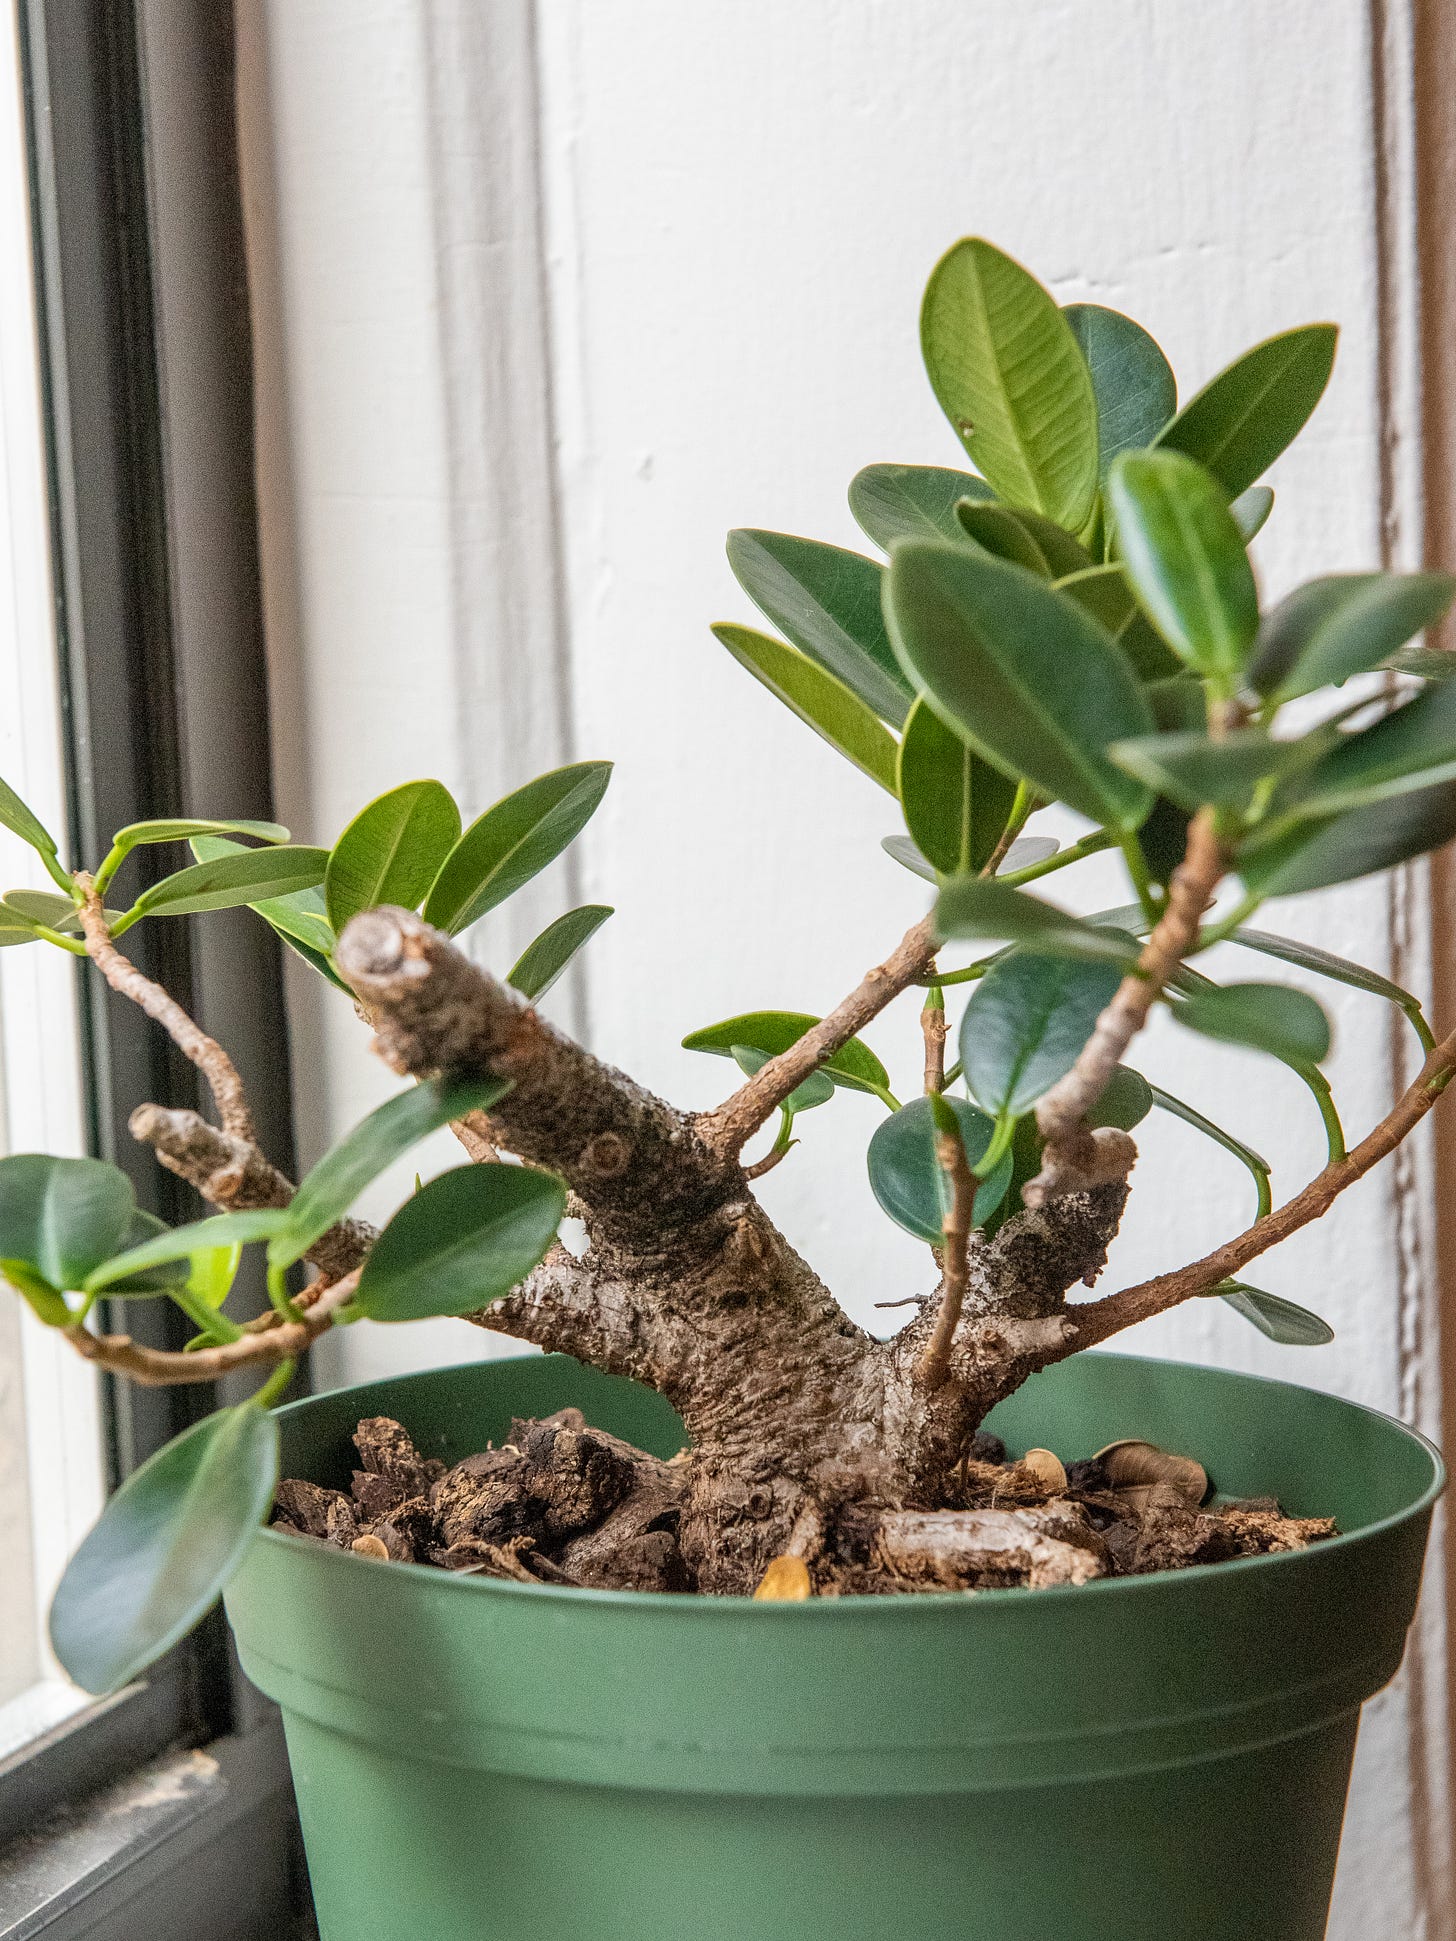 ID: My older, smaller ficus with apical branches removed and a new section of trunk forming.